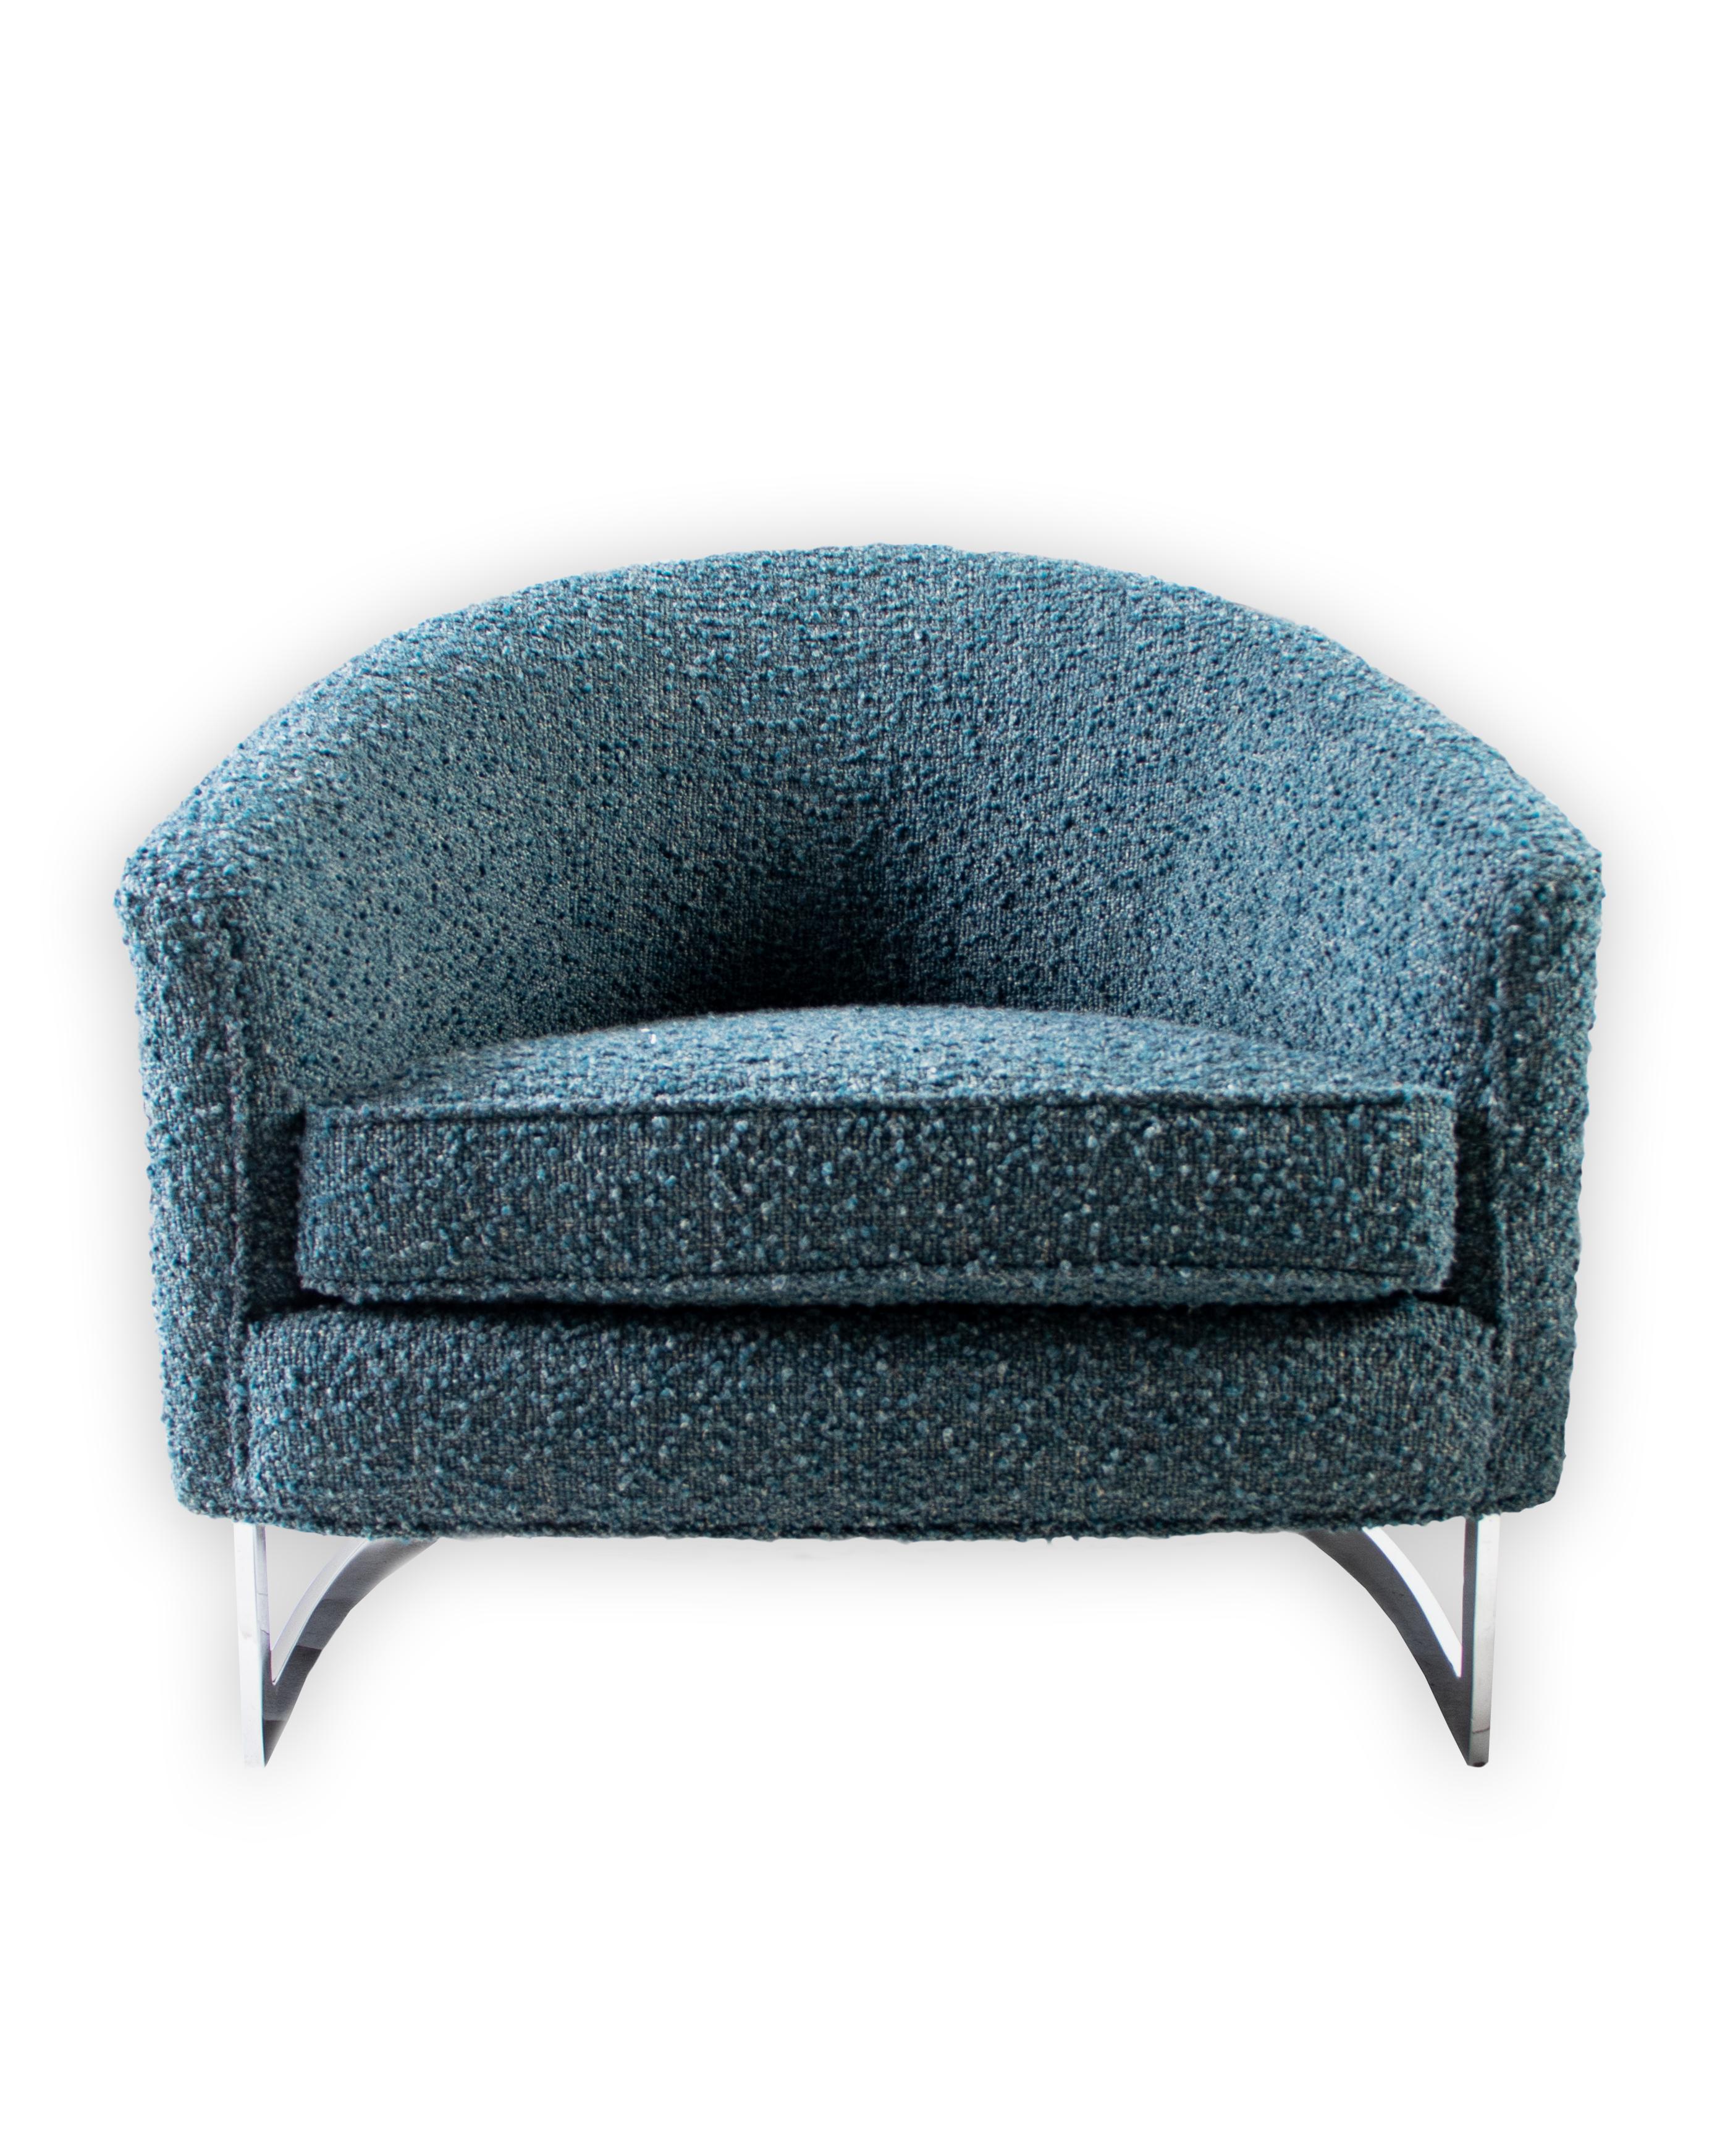 American Barrel Back Chairs Upholstered in Italian Boucle